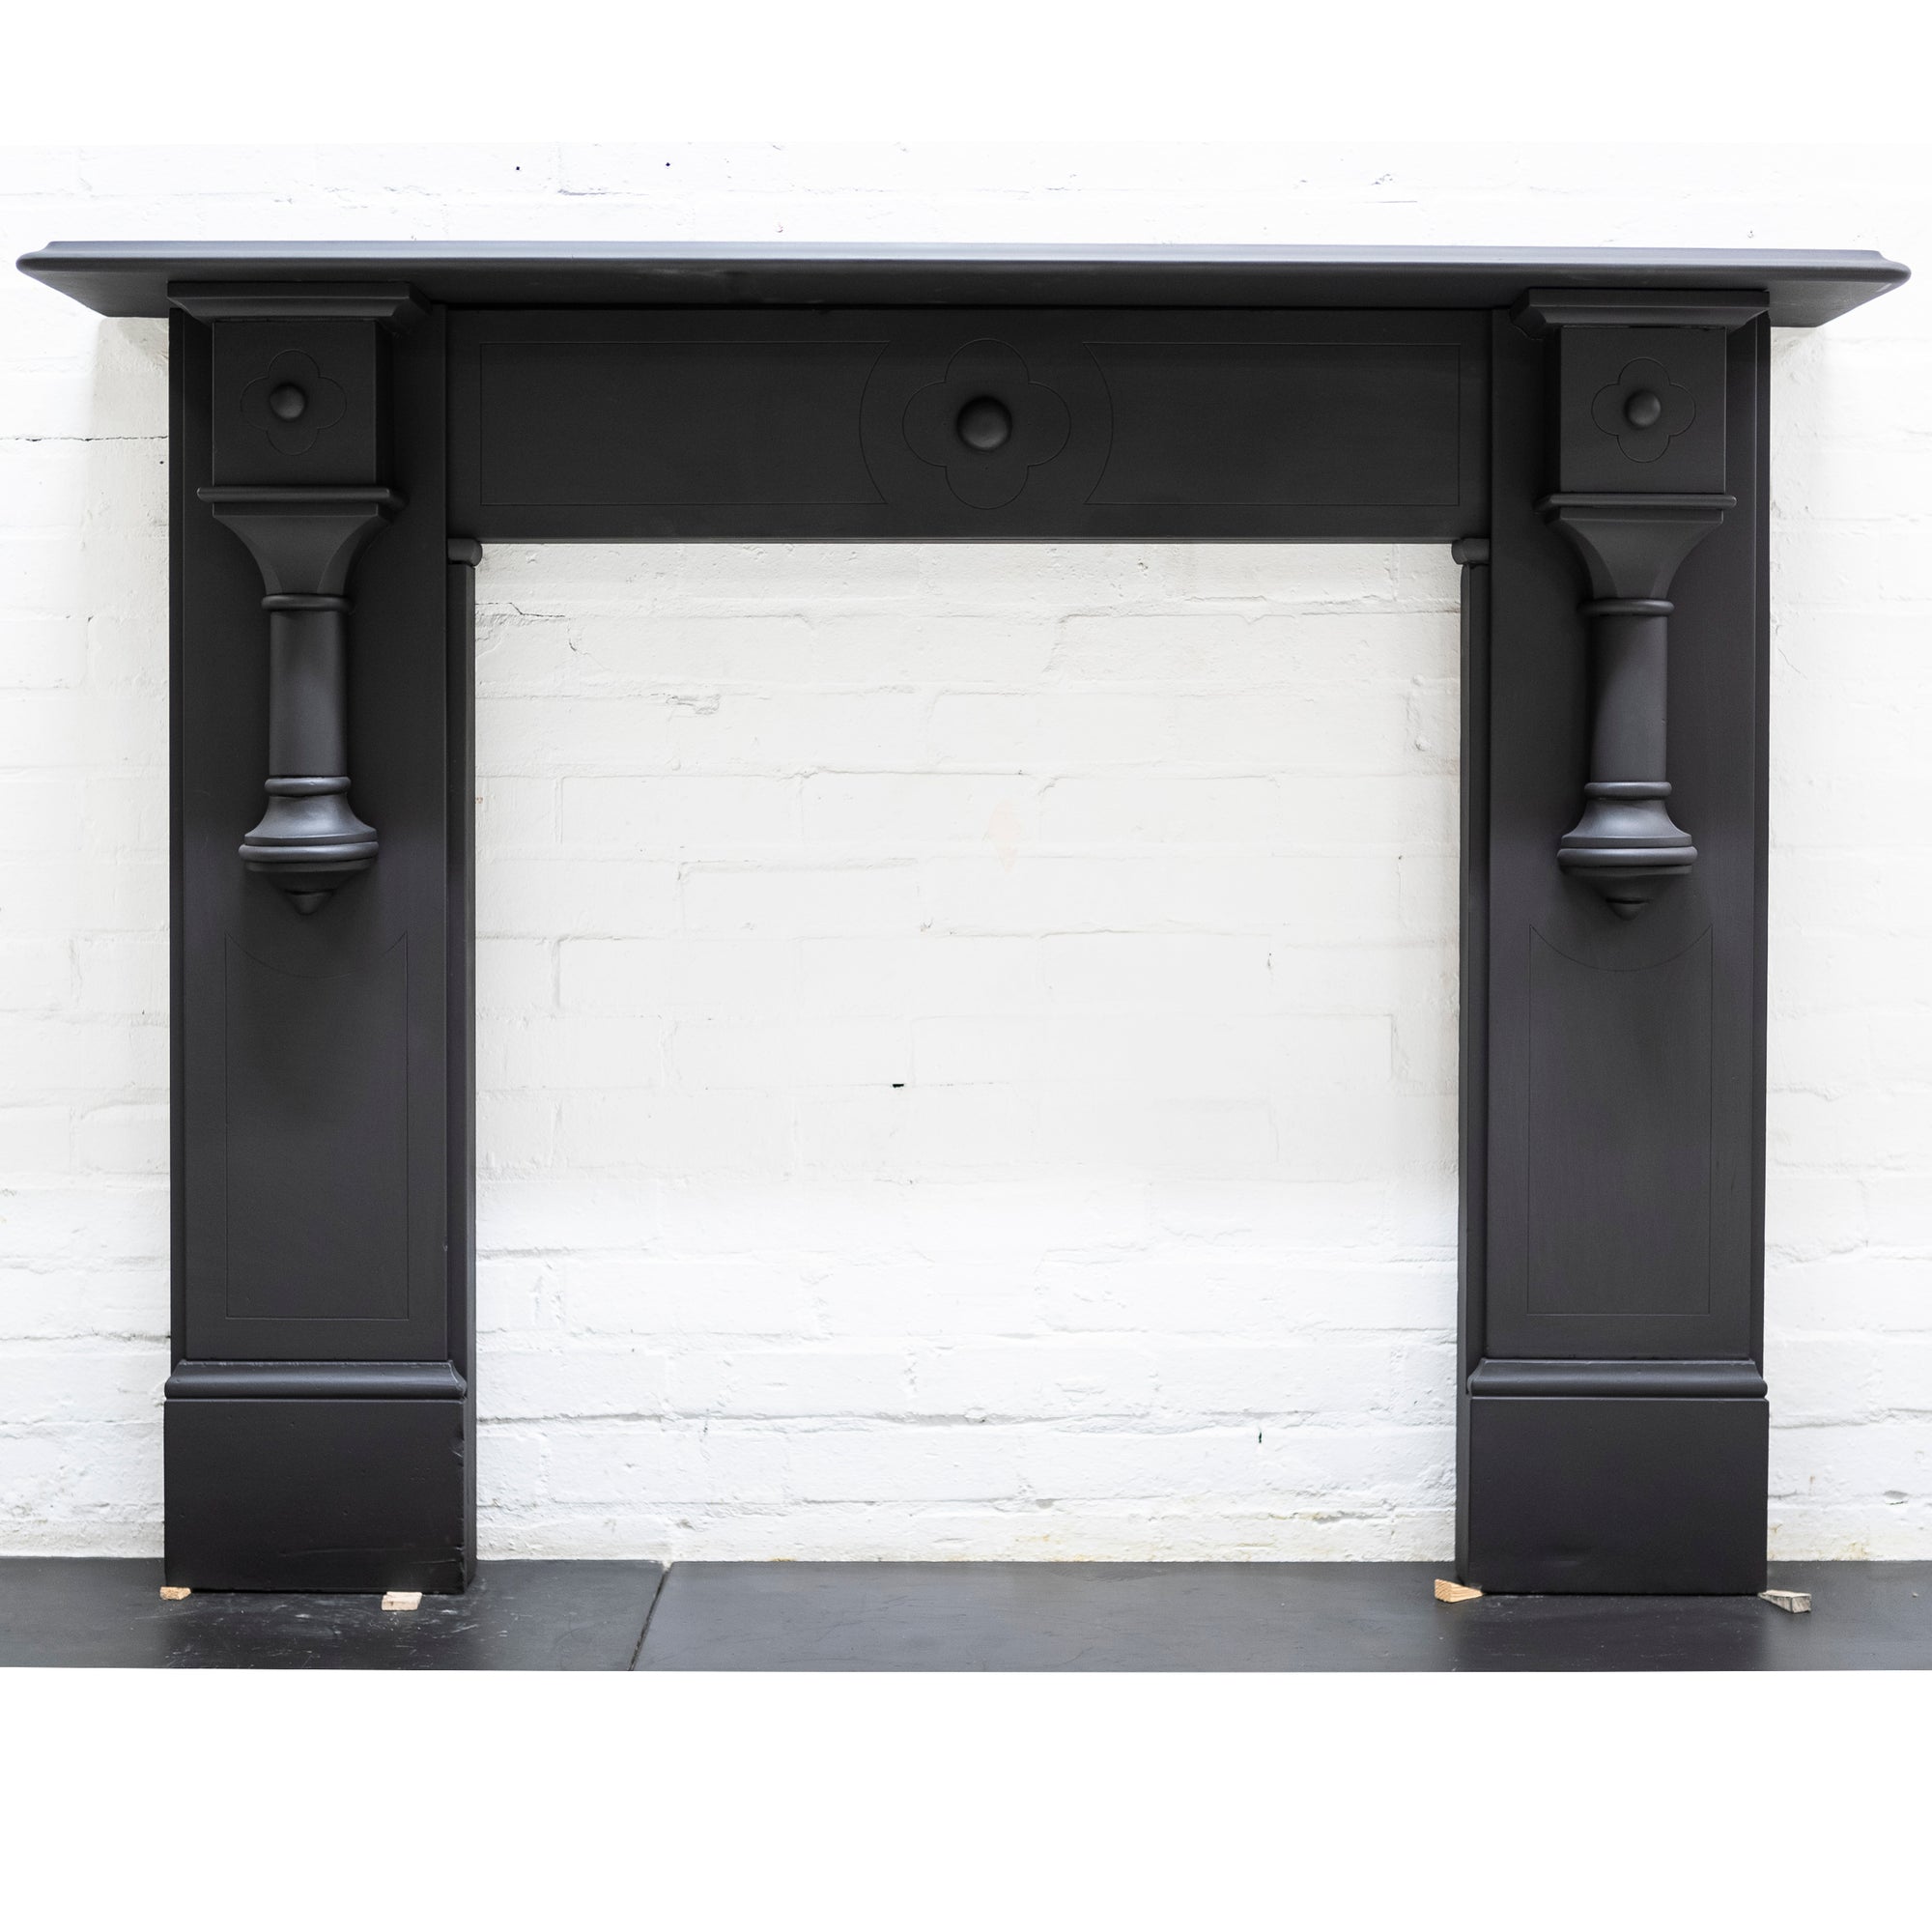 Large Antique Victorian Slate Fireplace Surround With Corbels | The Architectural Forum